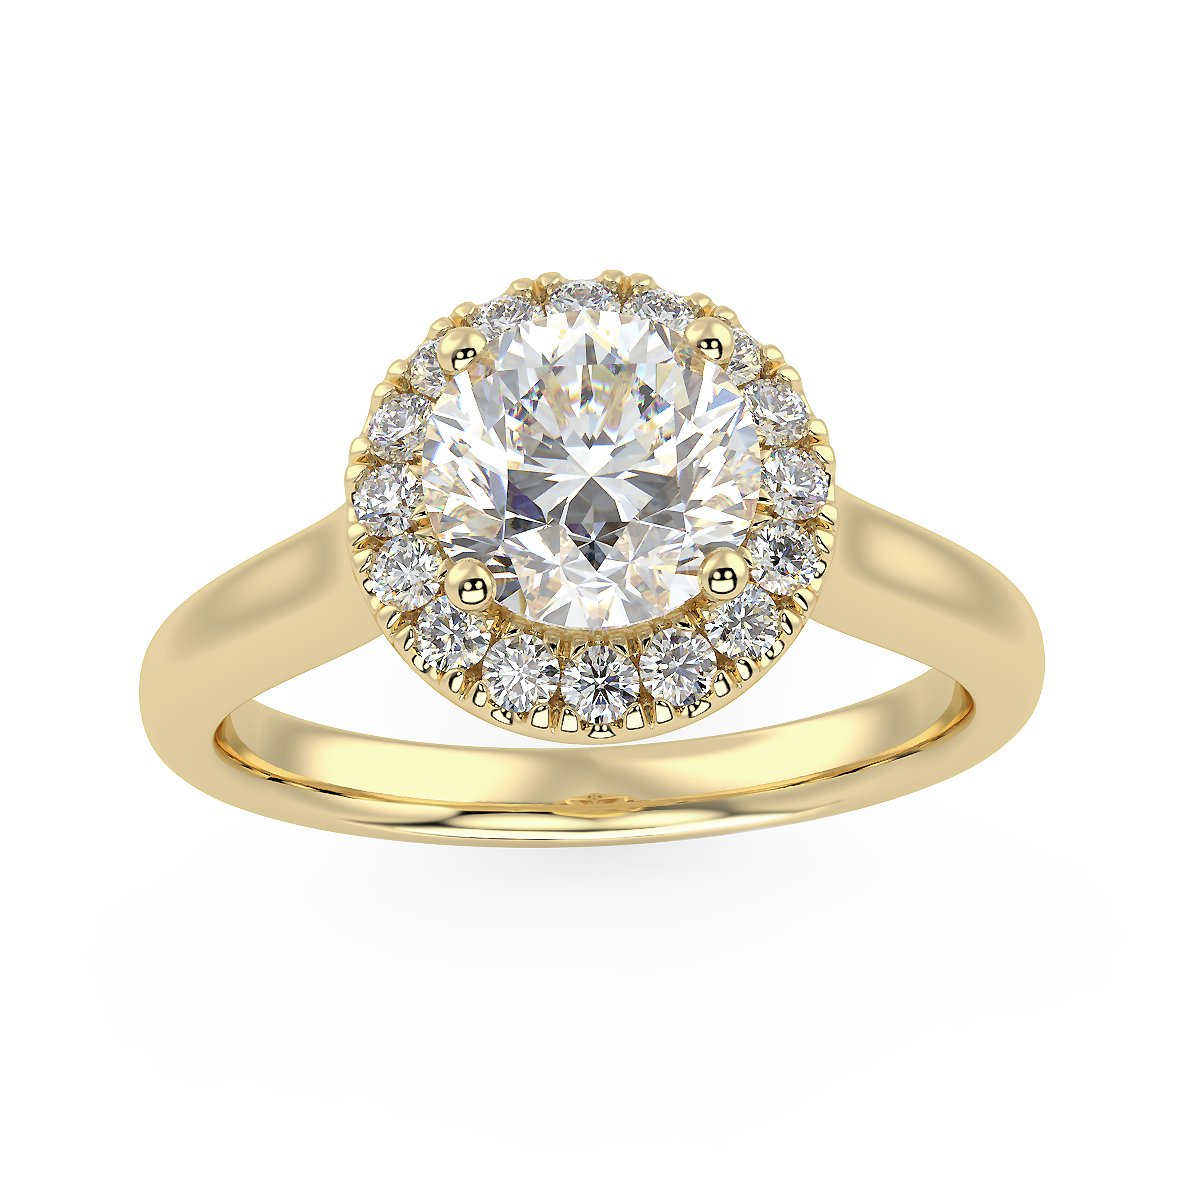 Rigel Engagement Ring in Yellow Gold